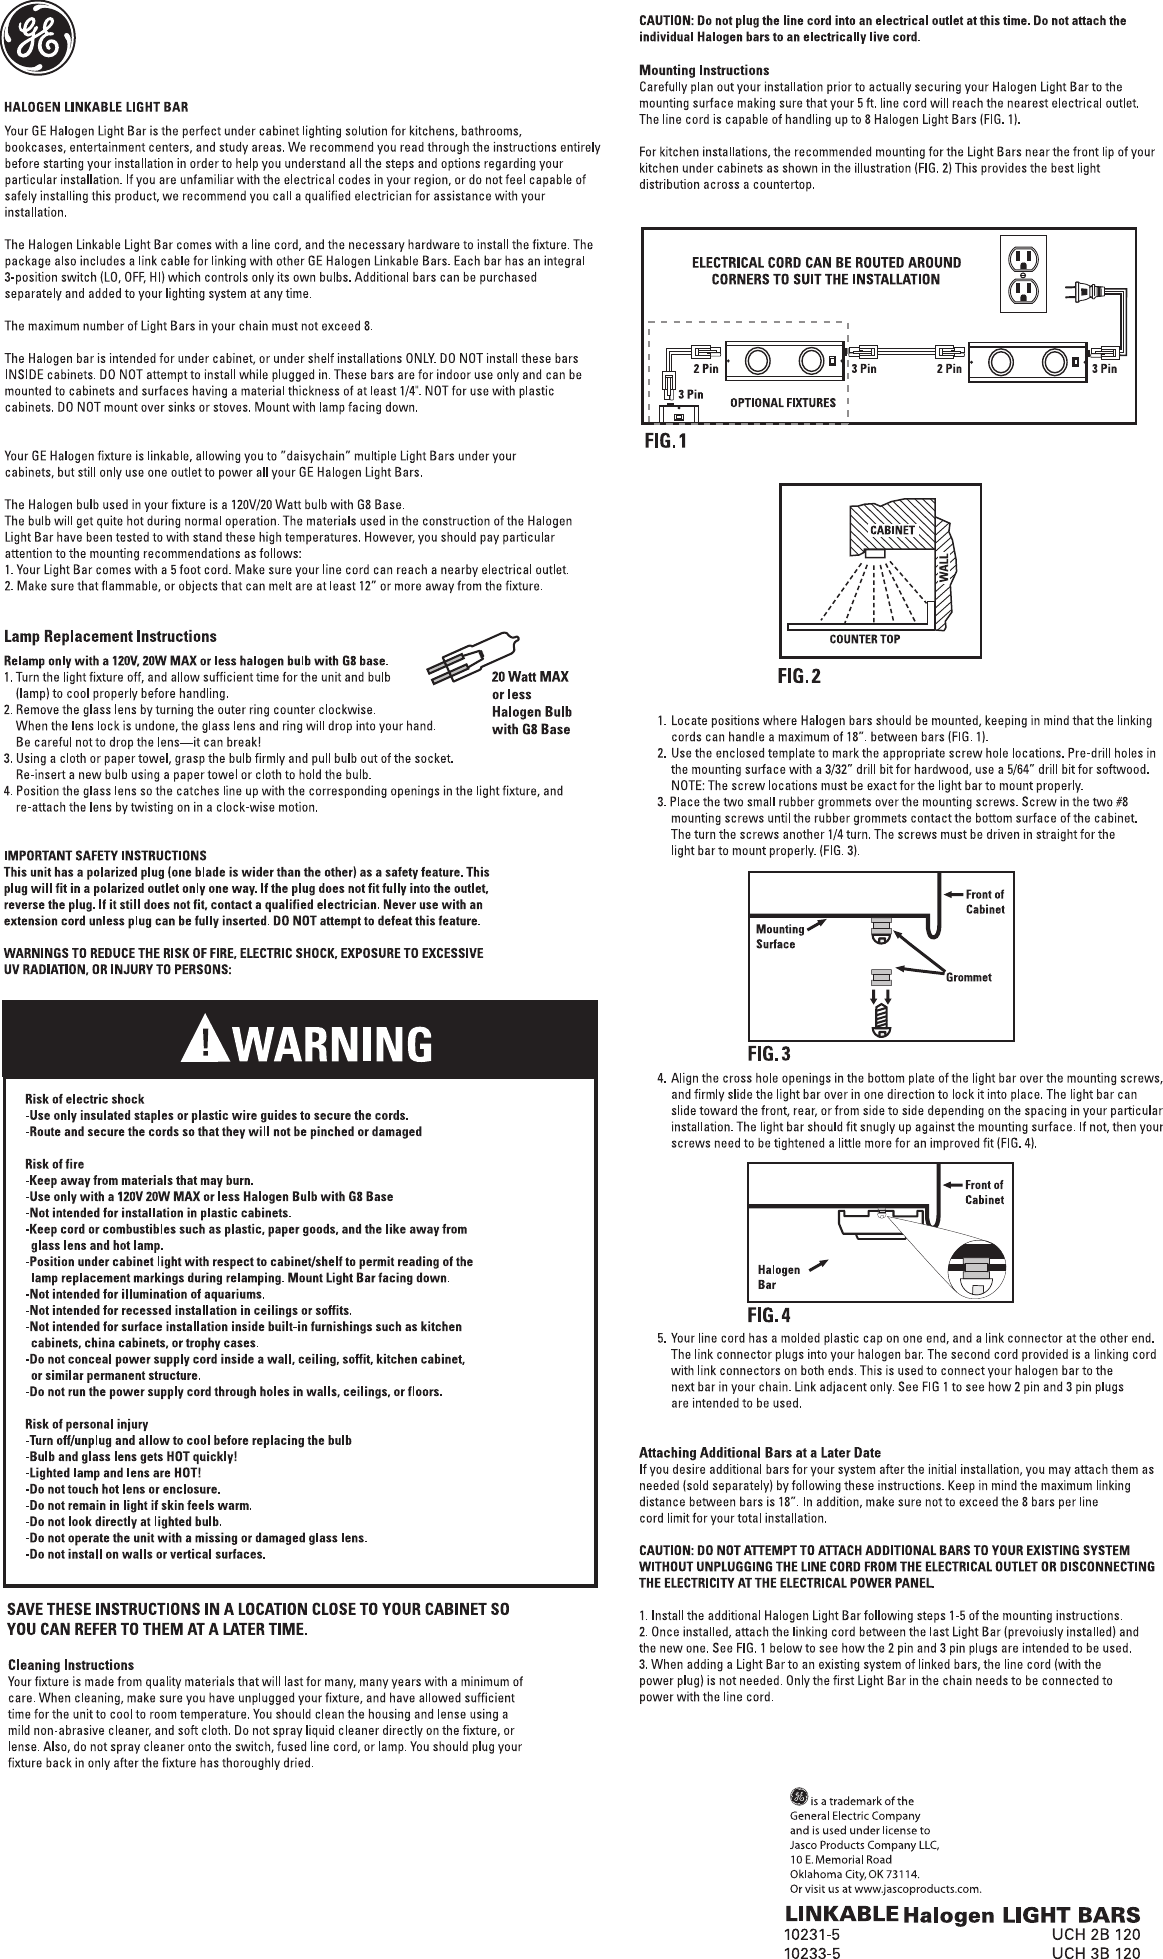 Page 1 of 1 - Ge-Appliances Ge-10233-Halogen-Linkable-Light-Bar-Owners-Manual 10233-5 Eng Instructions